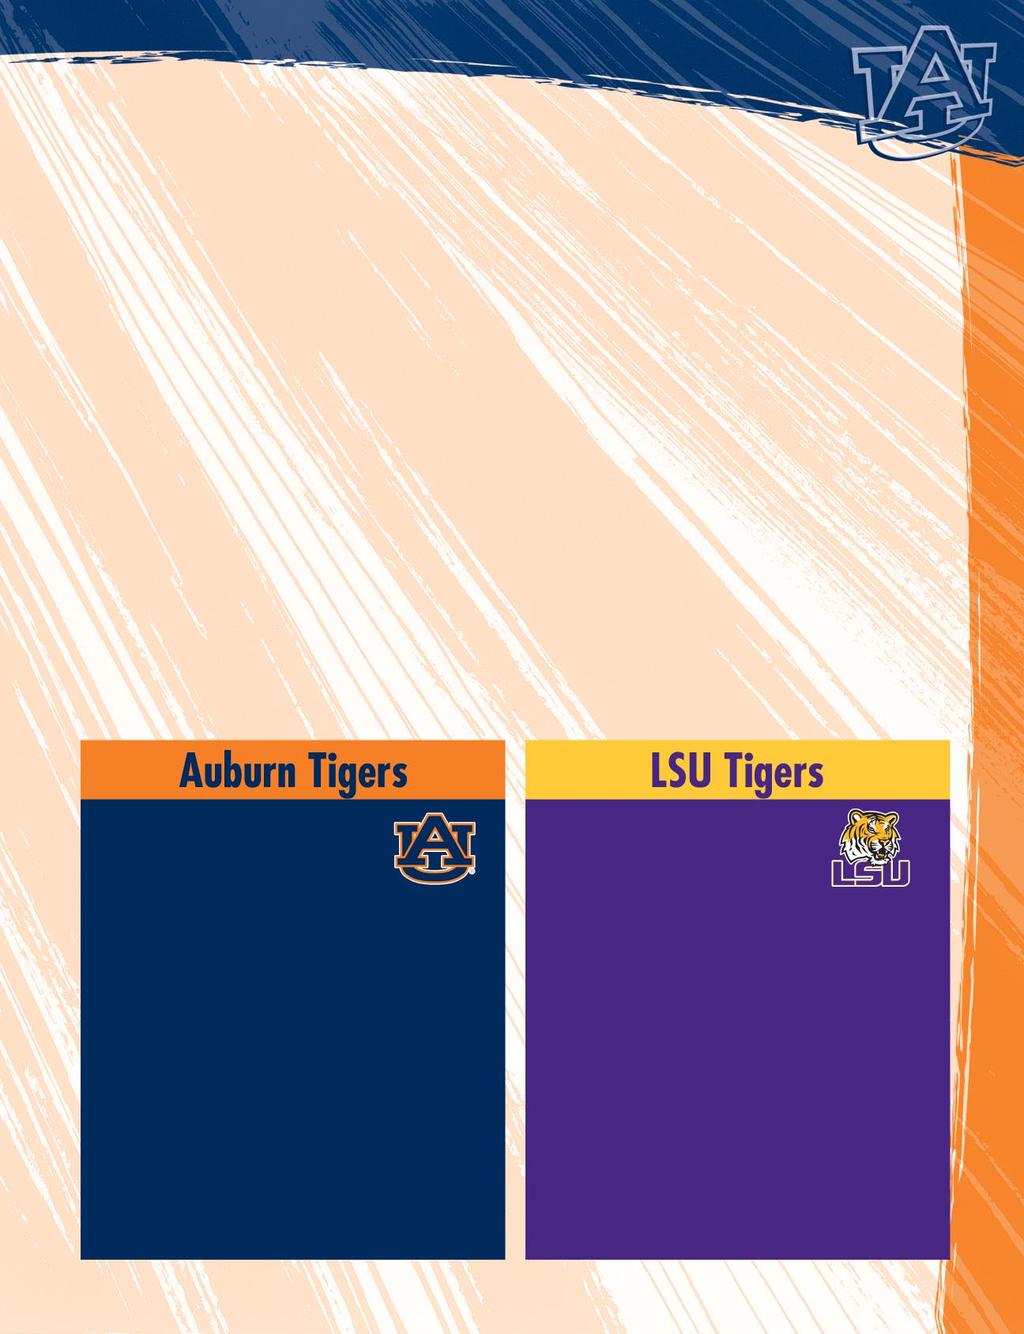 score when LSU scored on a 22-yard pass play with just one second left.